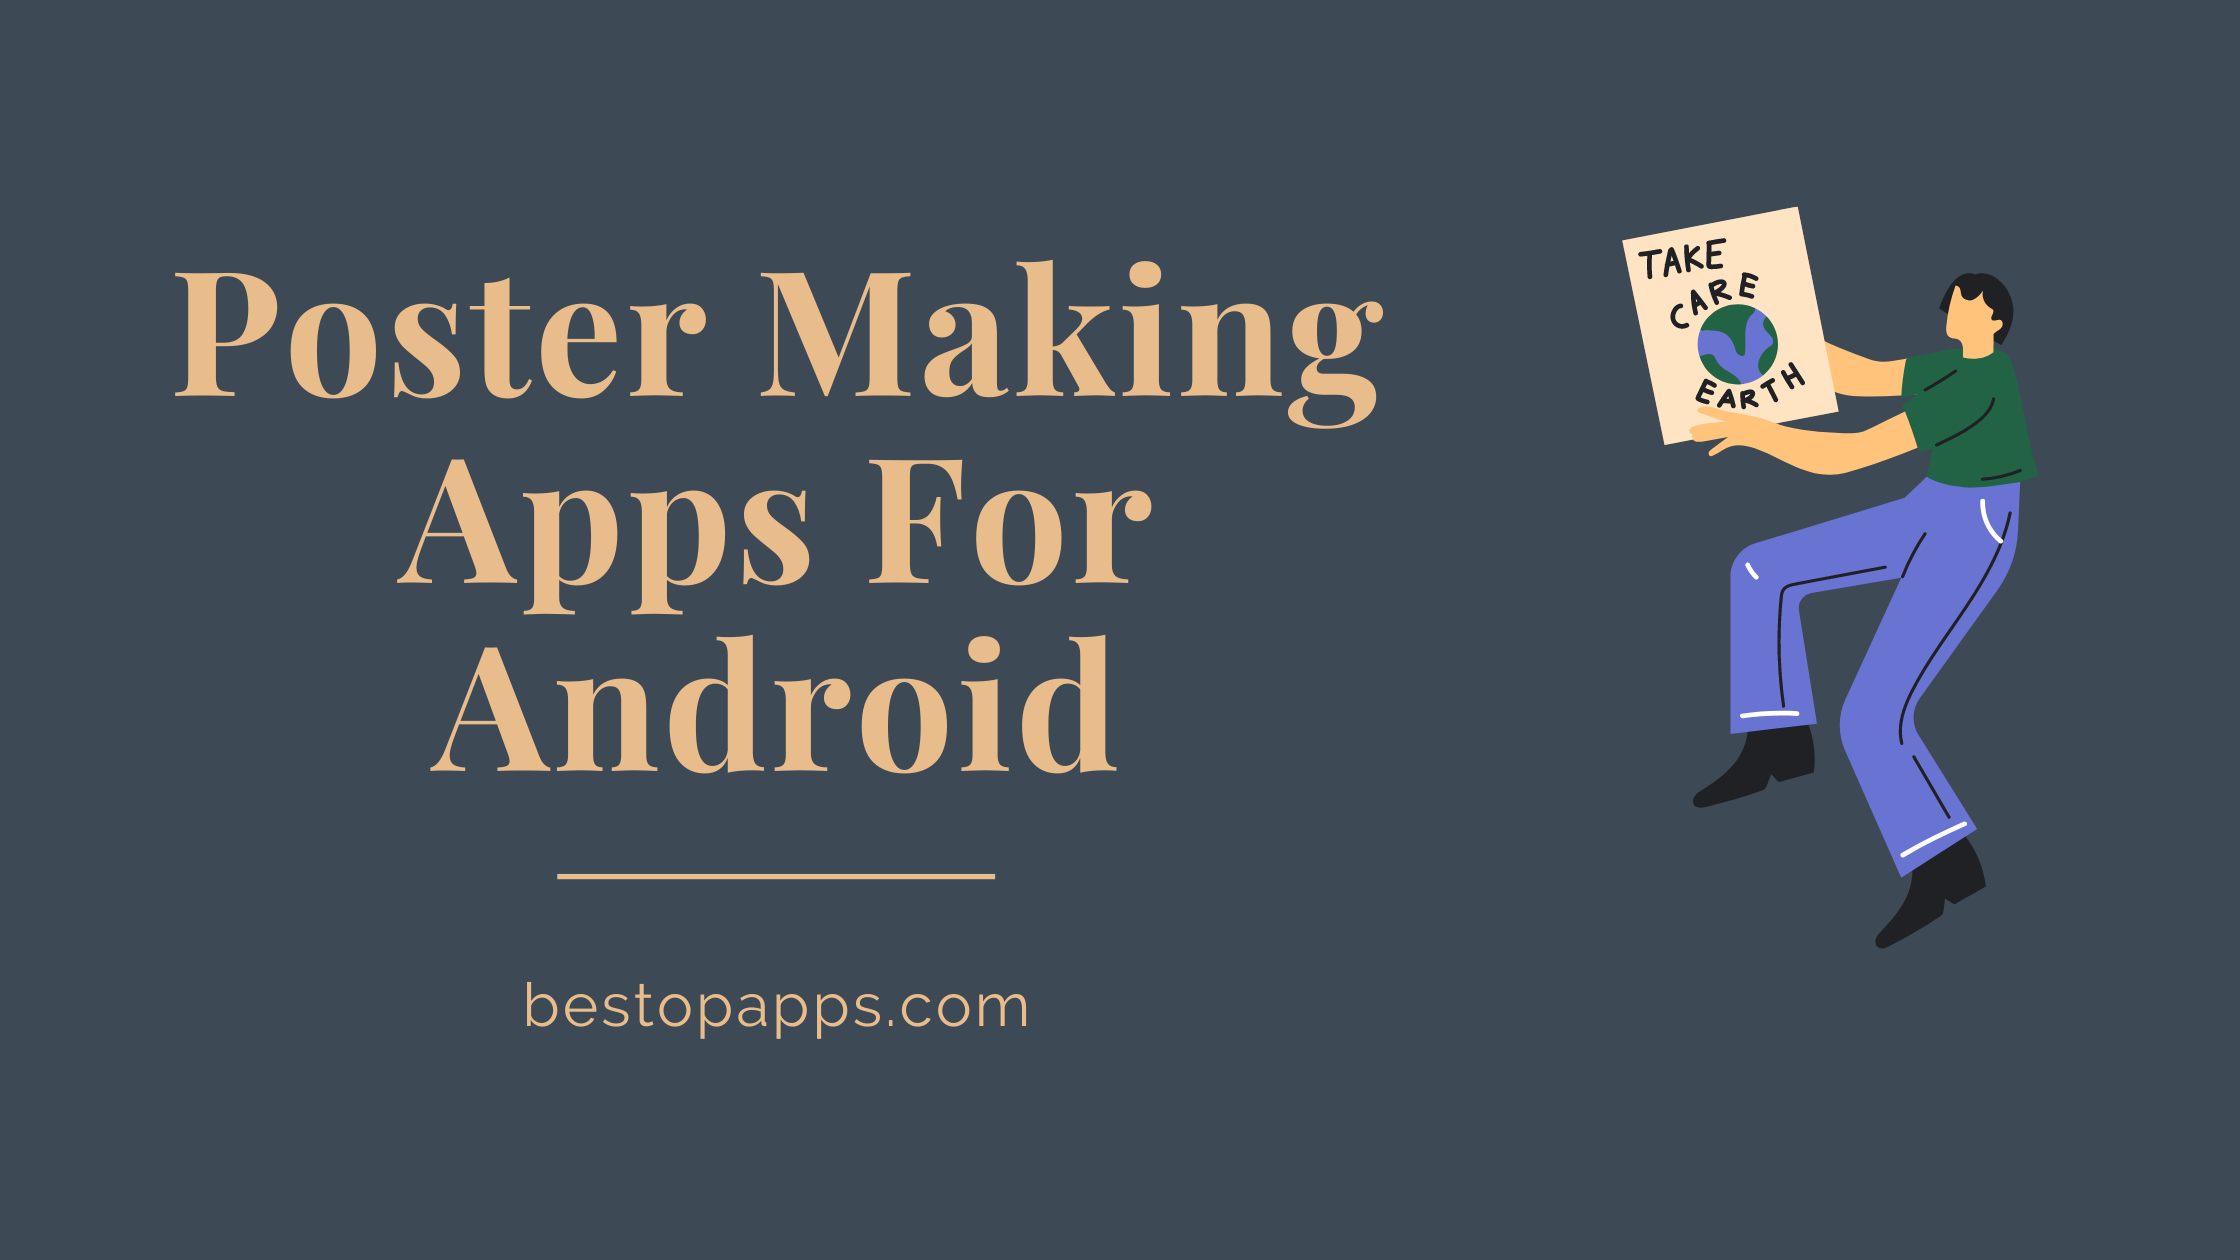 Poster Making Apps For Android